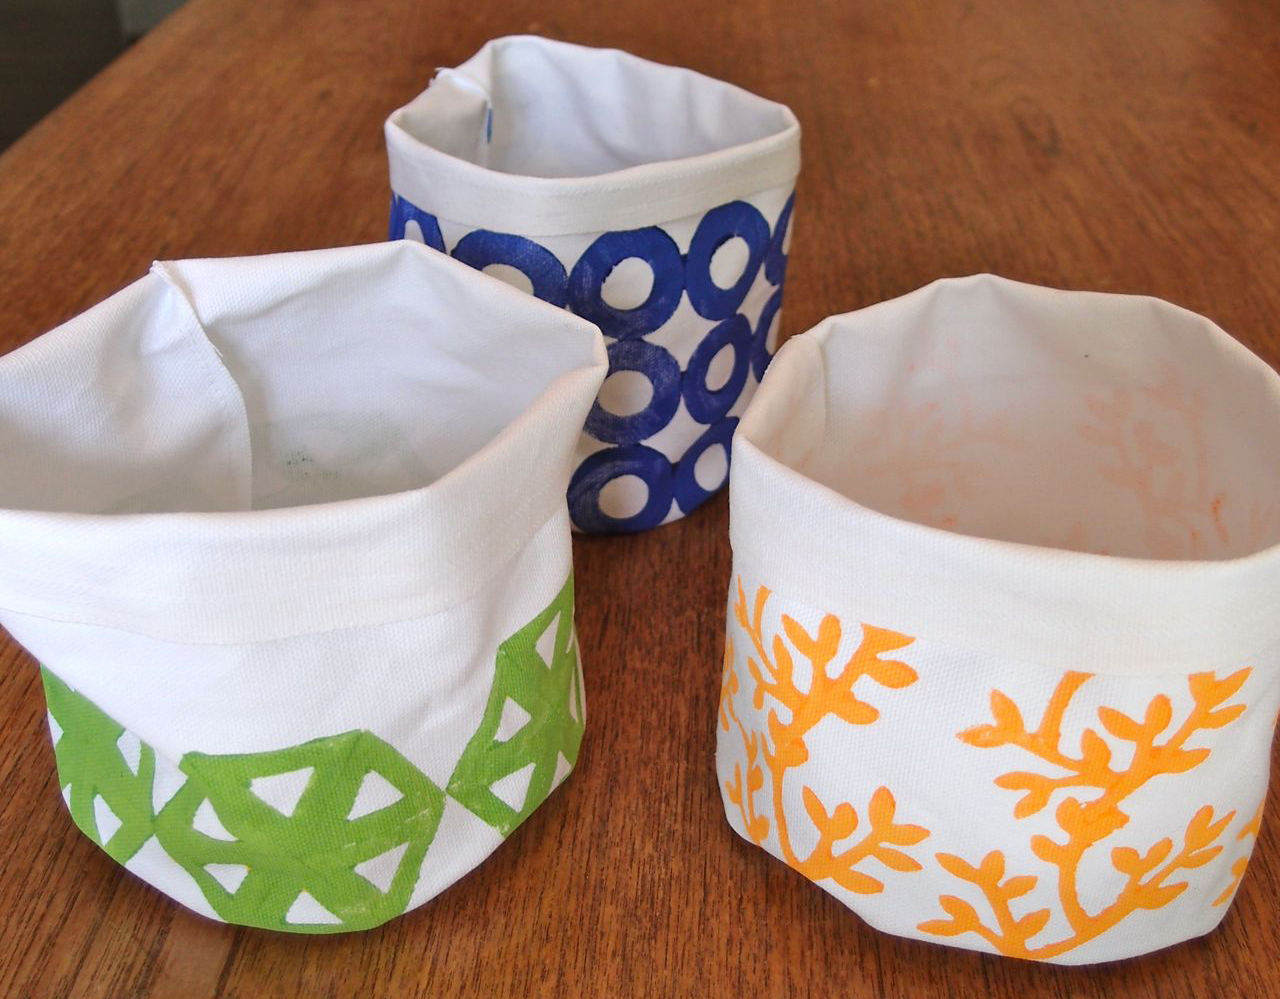 Let’s Craft: Canvas Block Print Storage Containers